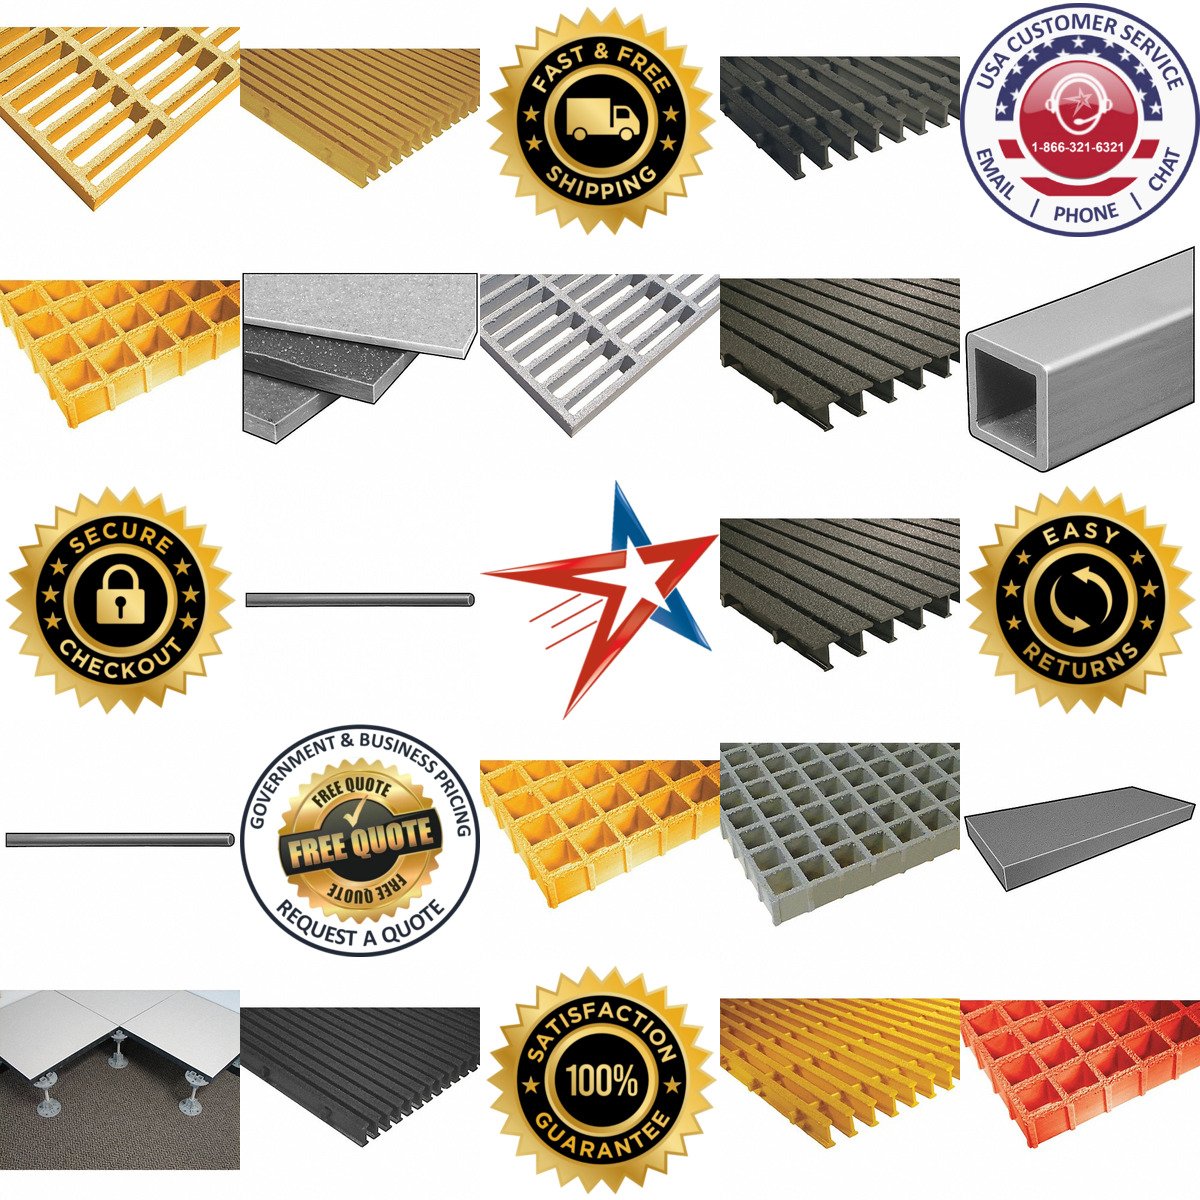 A selection of Fiberglass products on GoVets